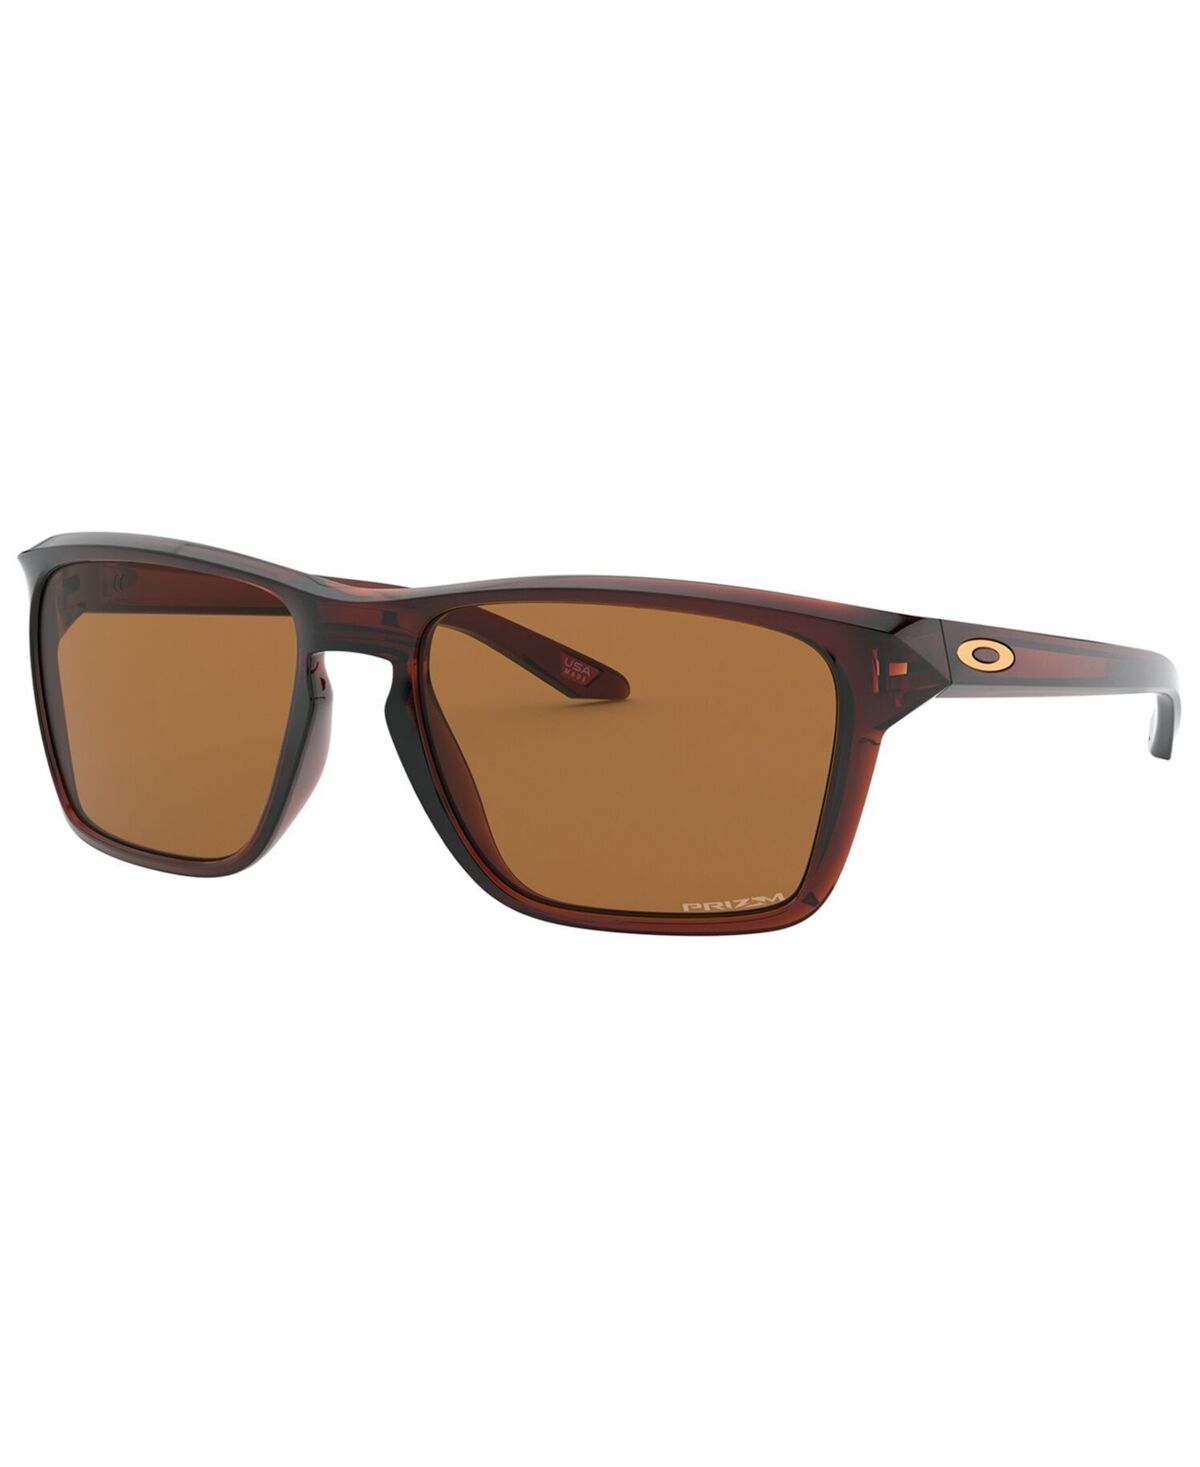 Oakley Sunglasses, OO9448 57 Sylas - POLISHED ROOTBEER/PRIZM BRONZE